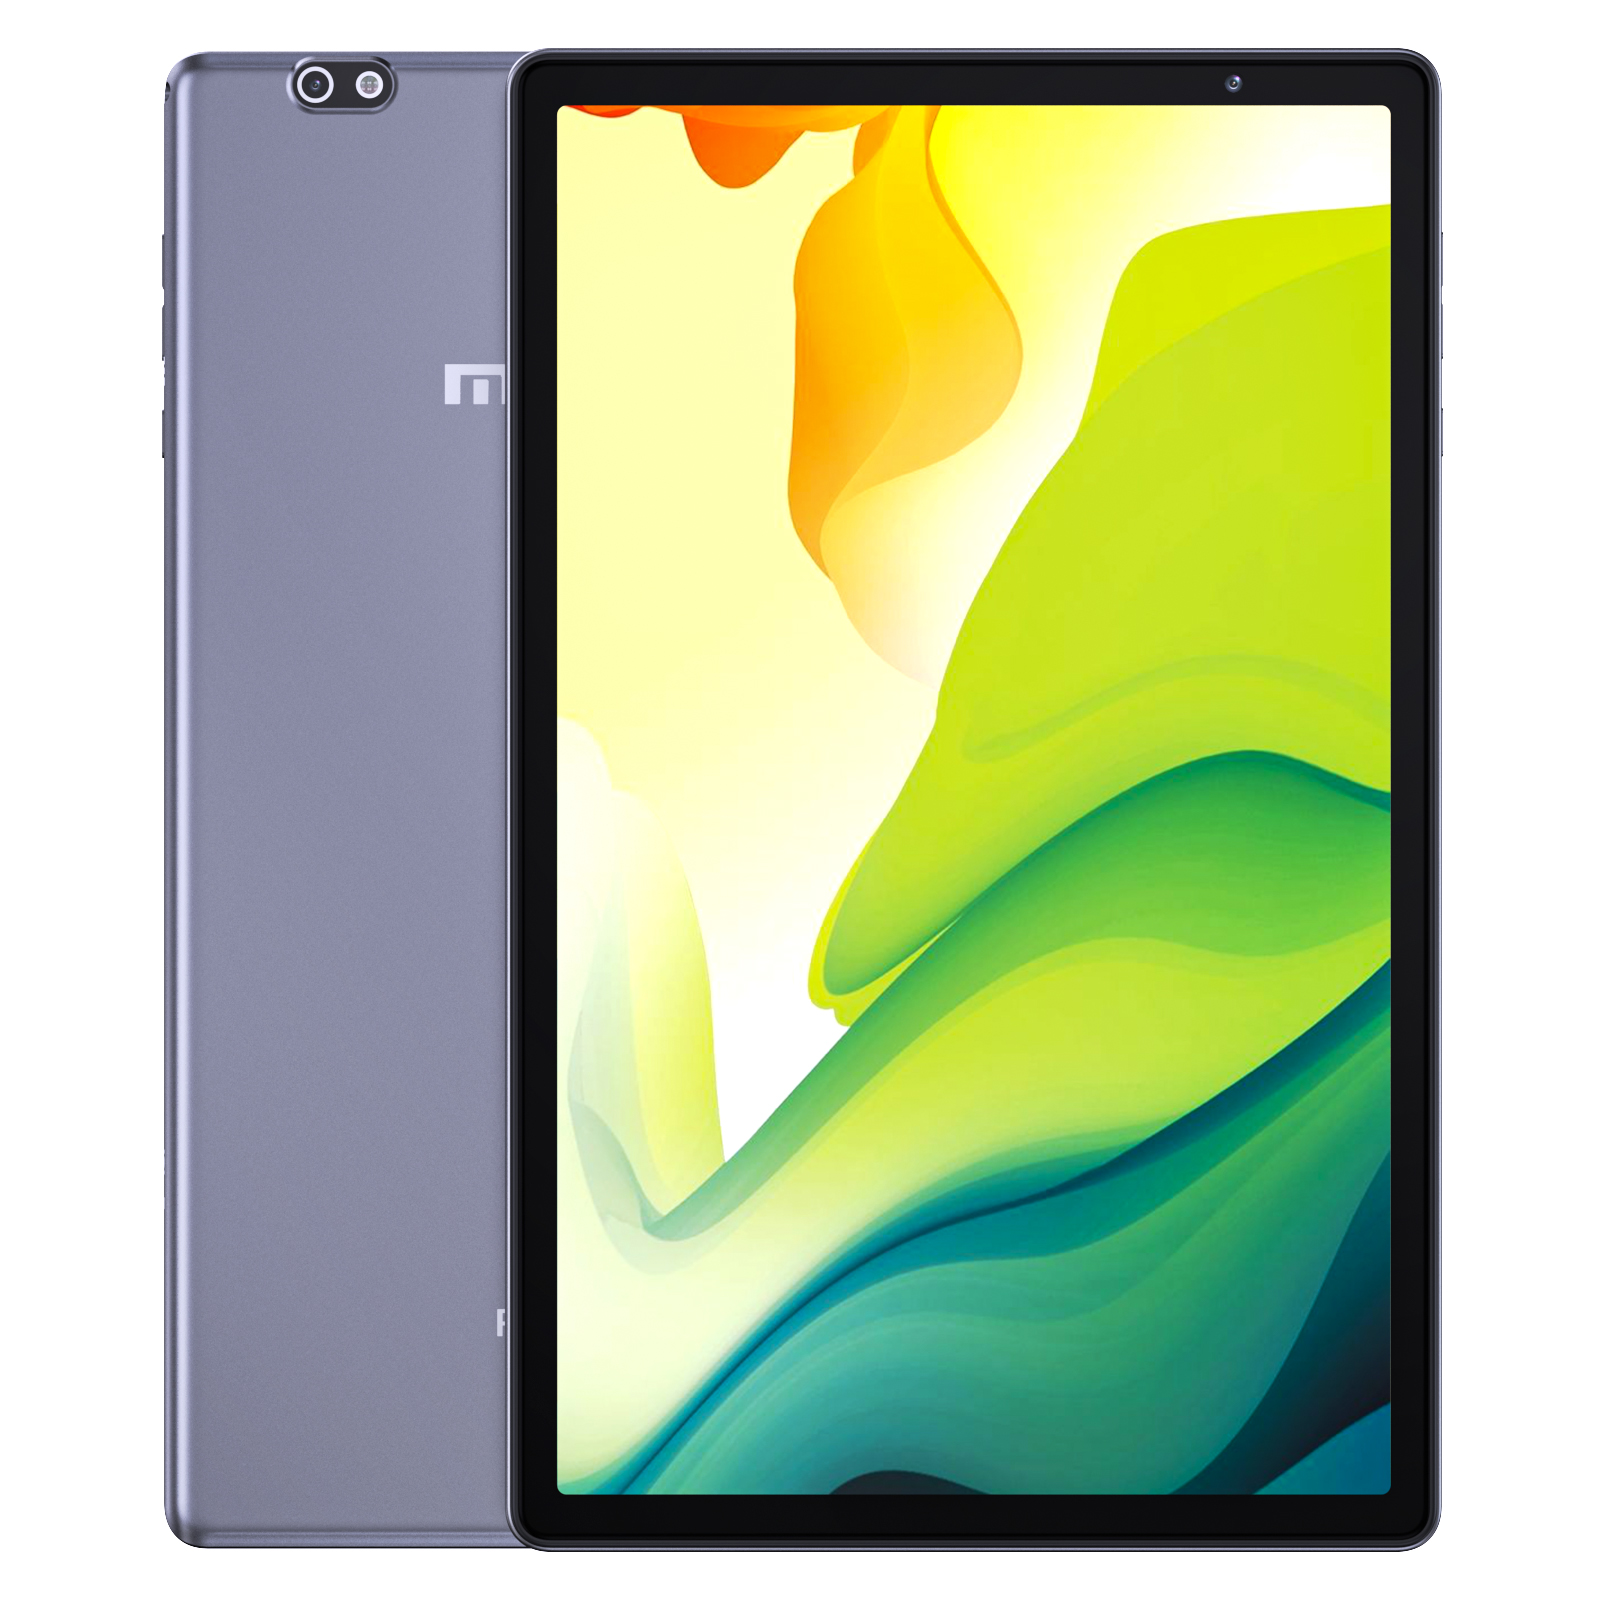 MAGCH T10 10.1 inch Tablet, Android 11.0, 3GB RAM, 32GB ROM, Quad-Core Processor, Up to 1.8Ghz, 8MP Rear Camera, HD IPS Display, 5000mAh, Wi-Fi, Bluetooth 4.2, Metal Body, Grey